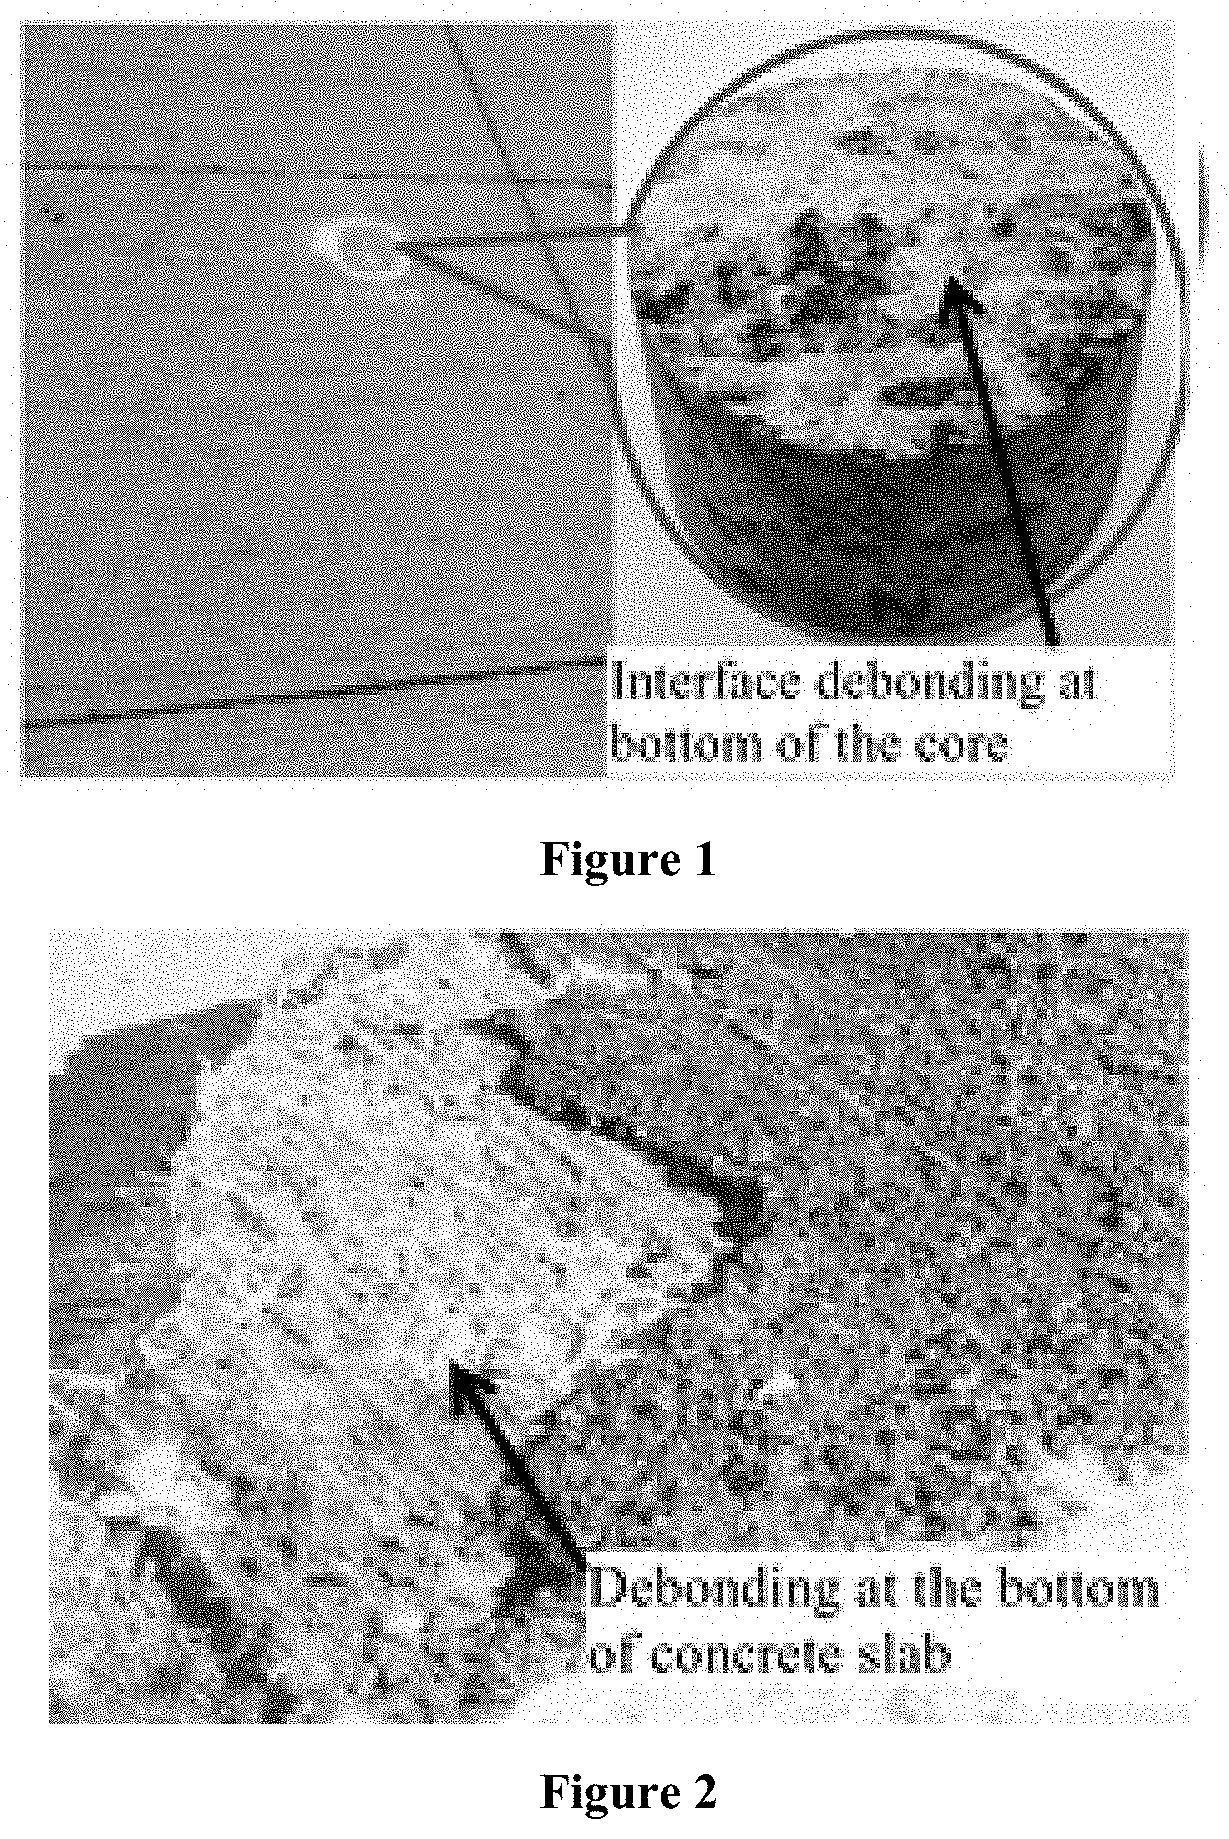 Cementitious Composition With High Bond Strength To Both Asphalt And Cement Based Materials